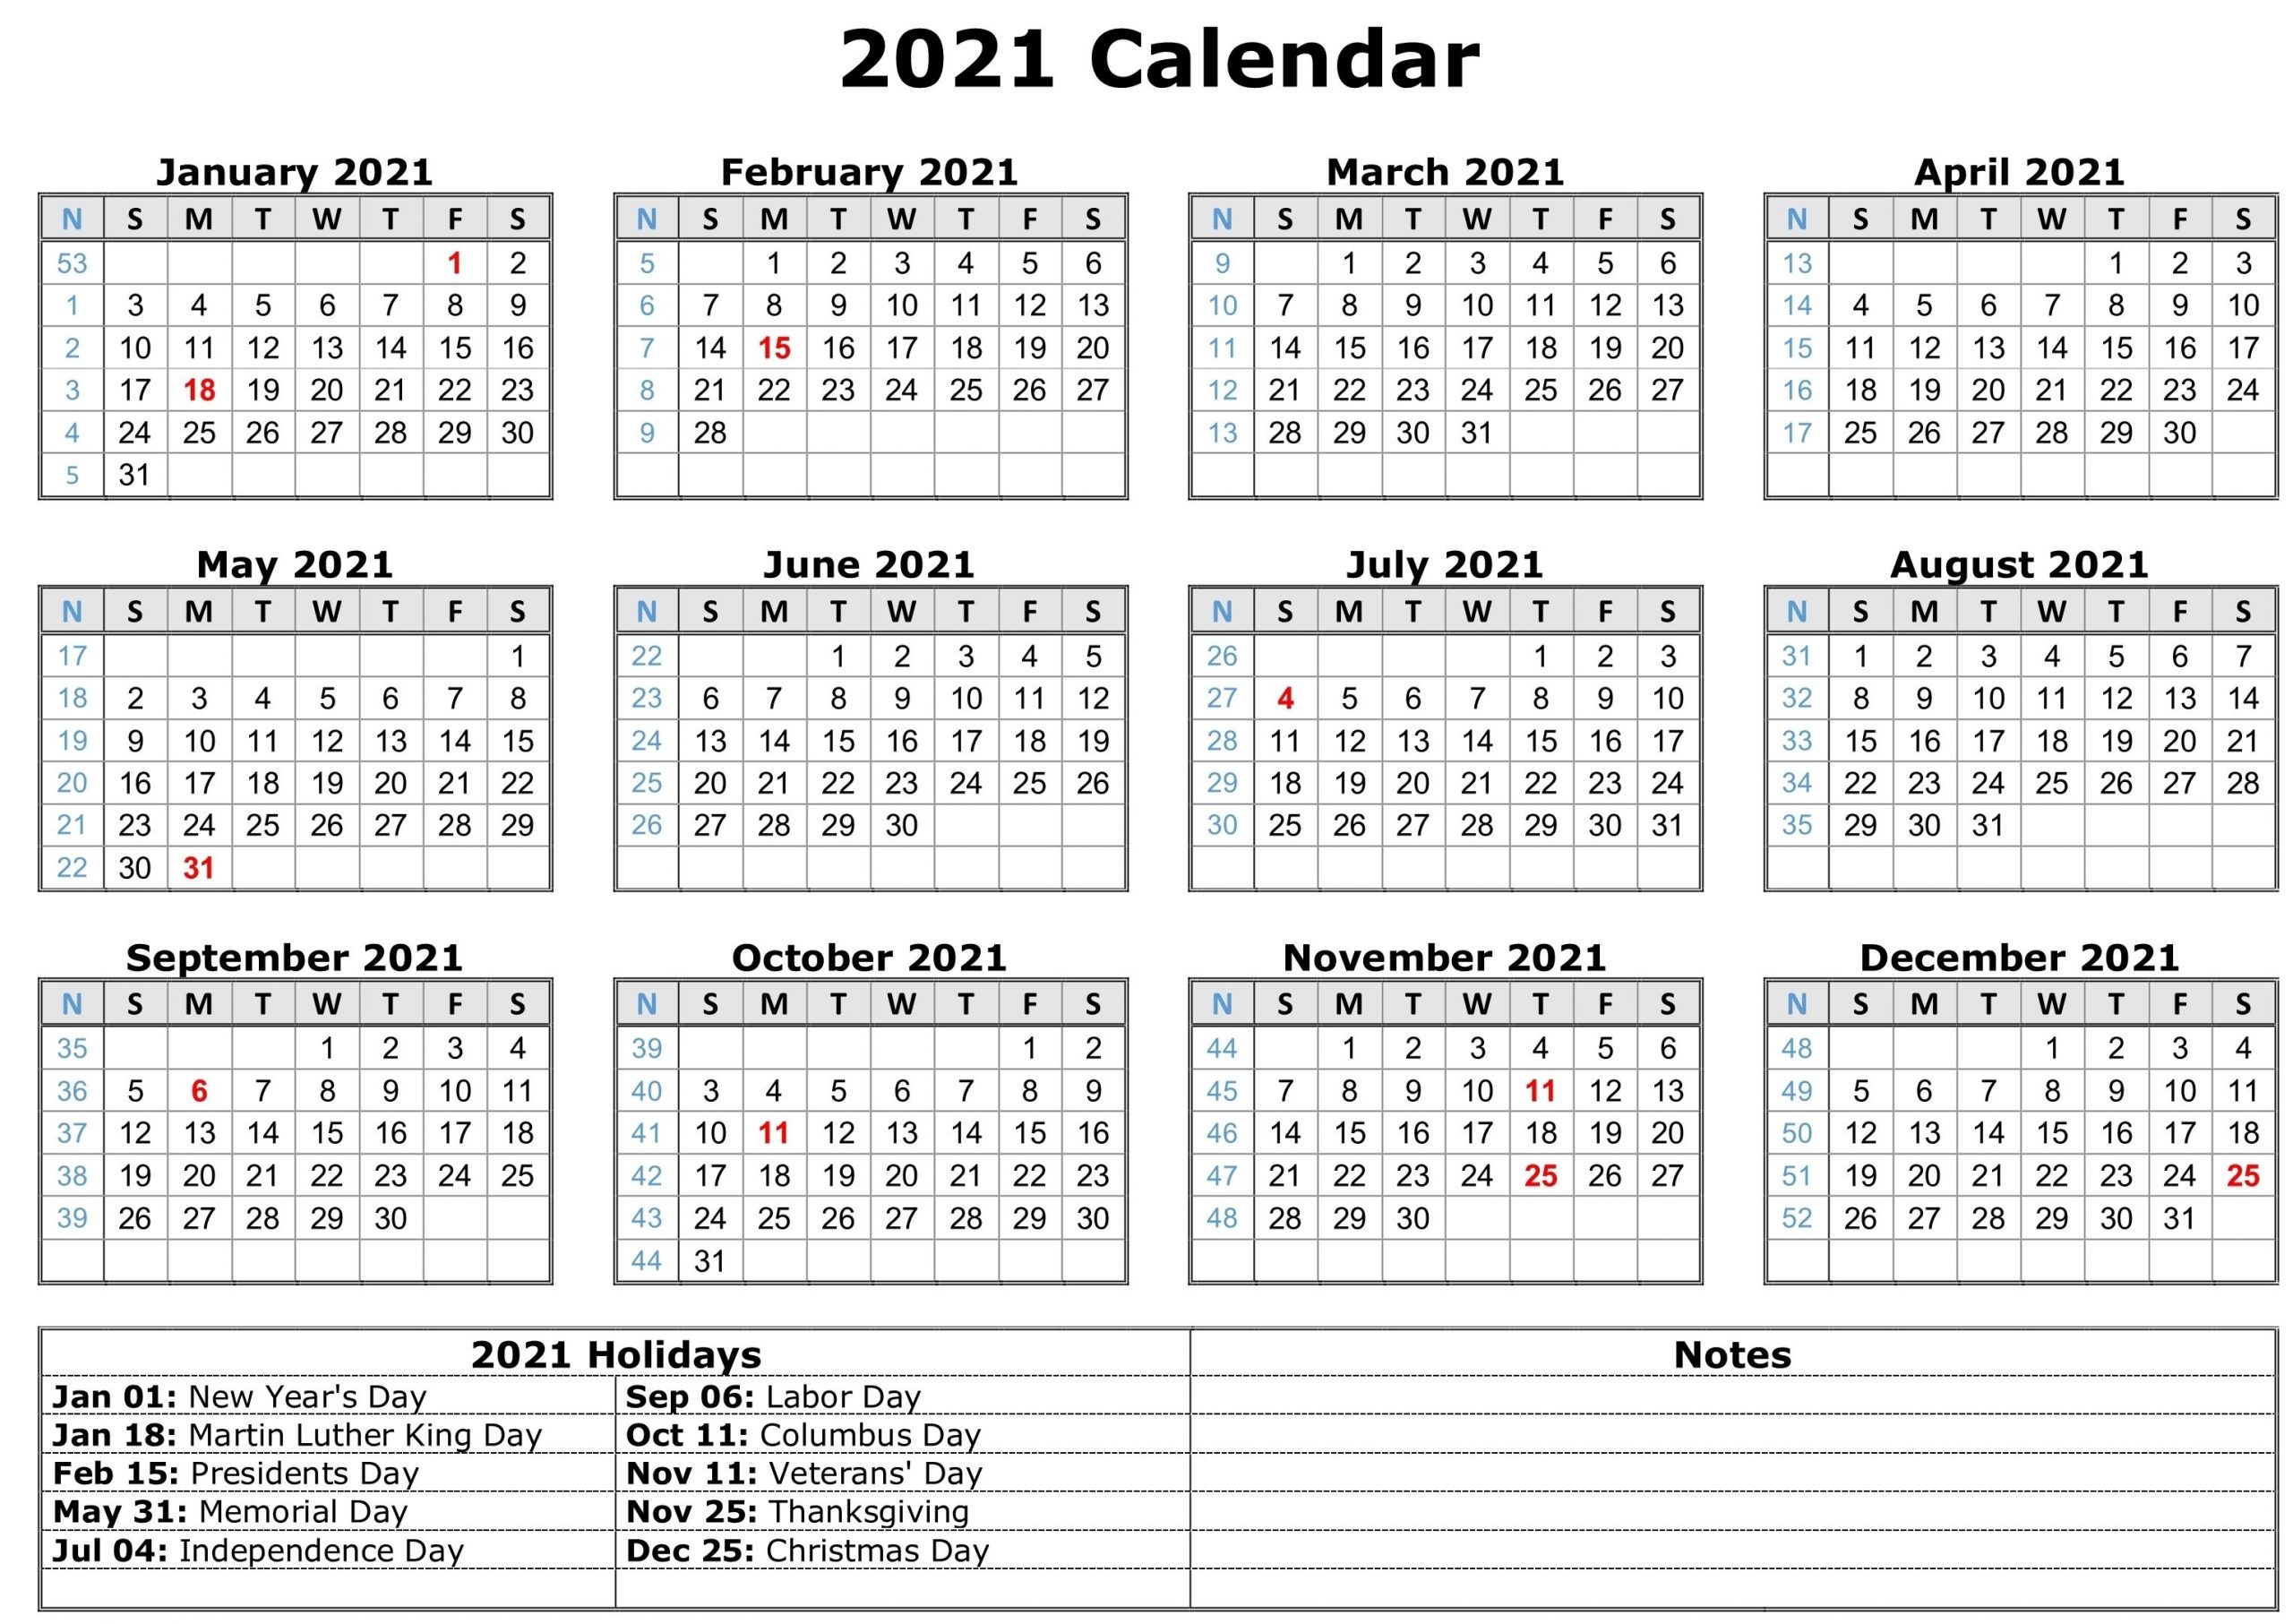 Pick 2021 Calendars To Print Without Downloading